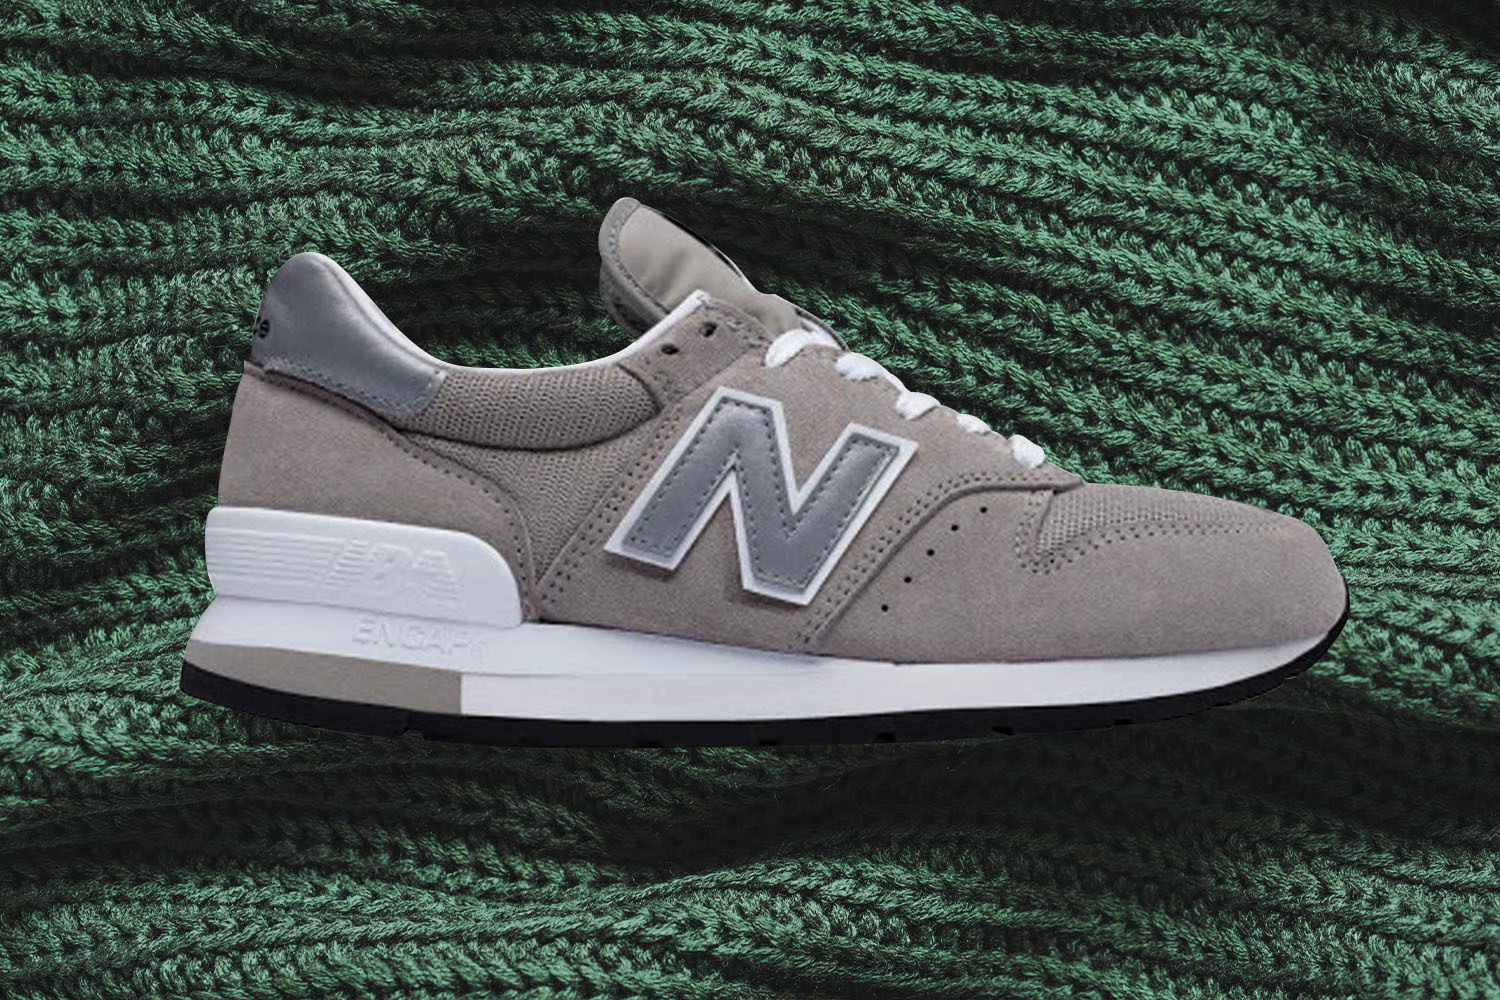 Why the Grey New Balance Sneaker Never 